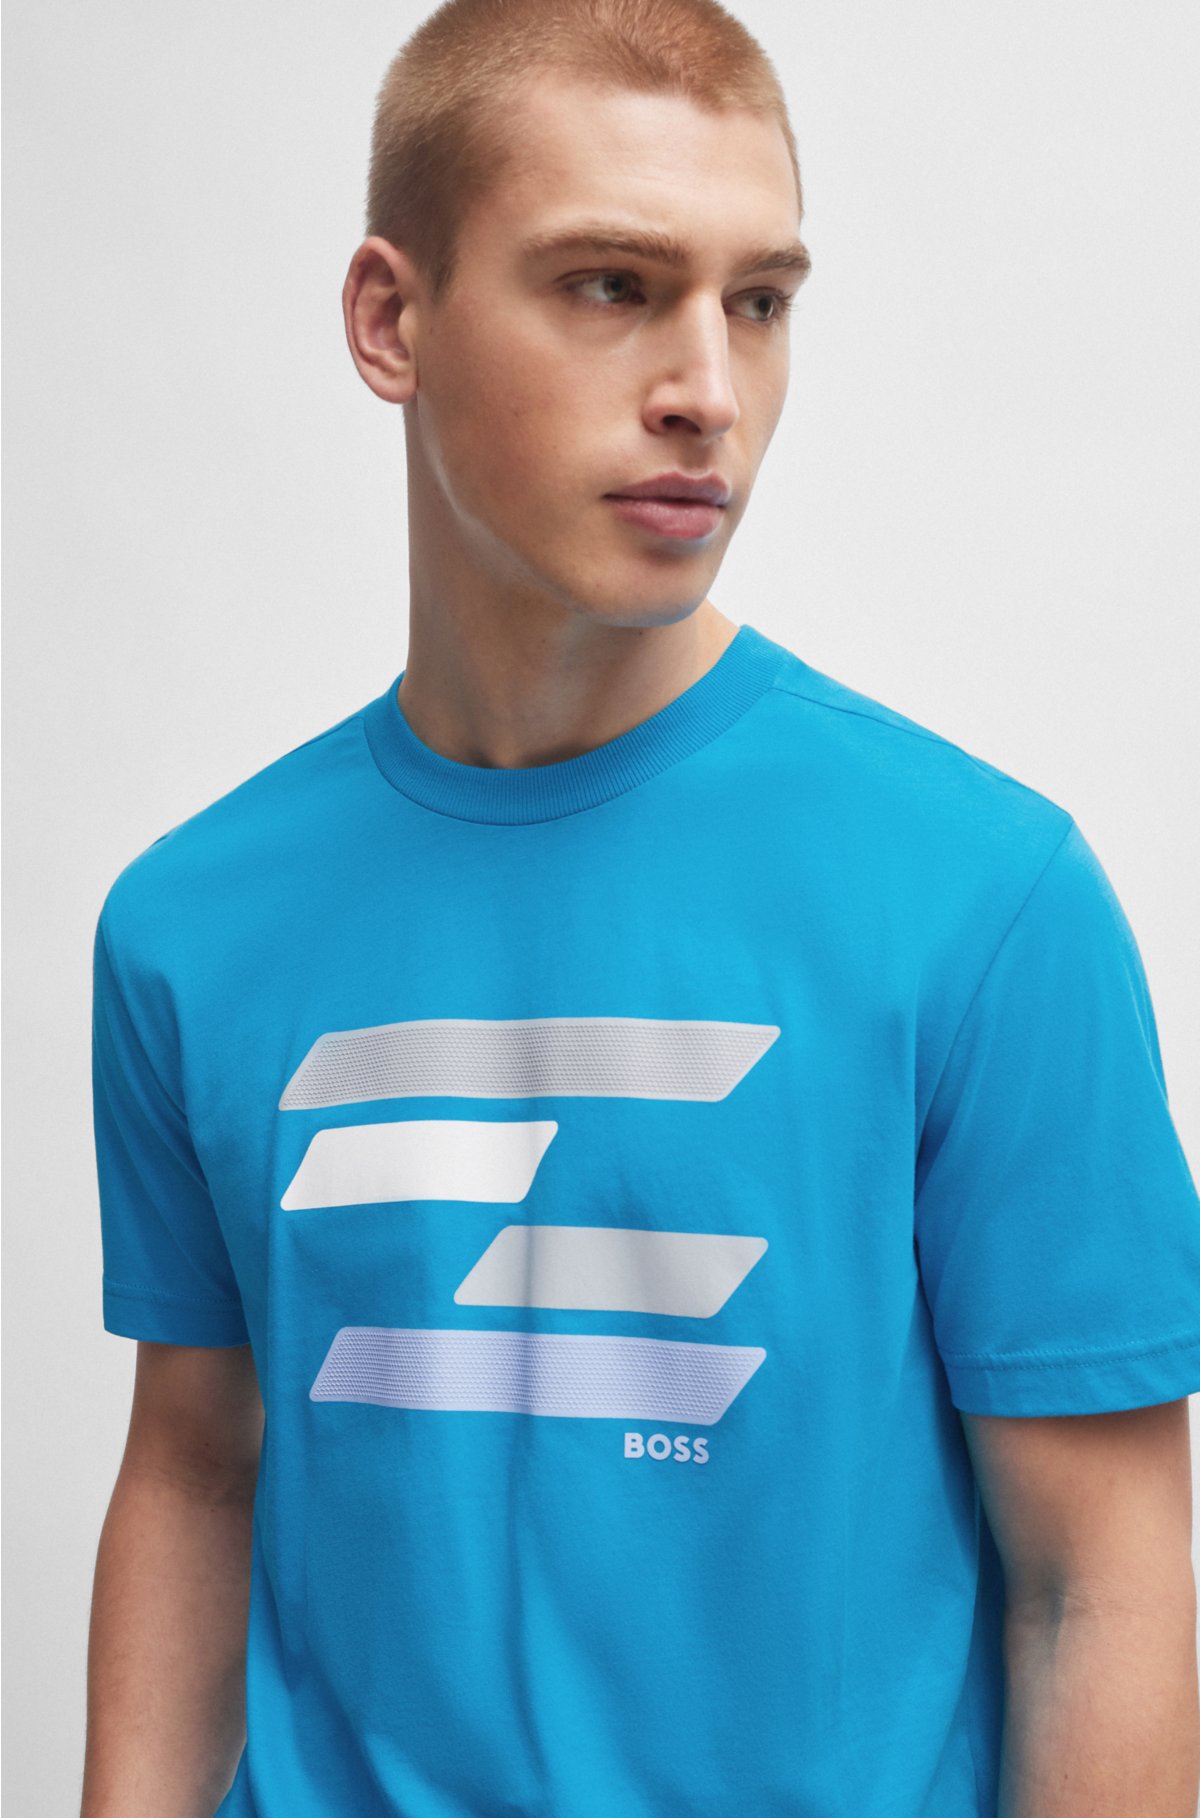 Cotton-jersey T-shirt with flag-inspired artwork, Turquoise